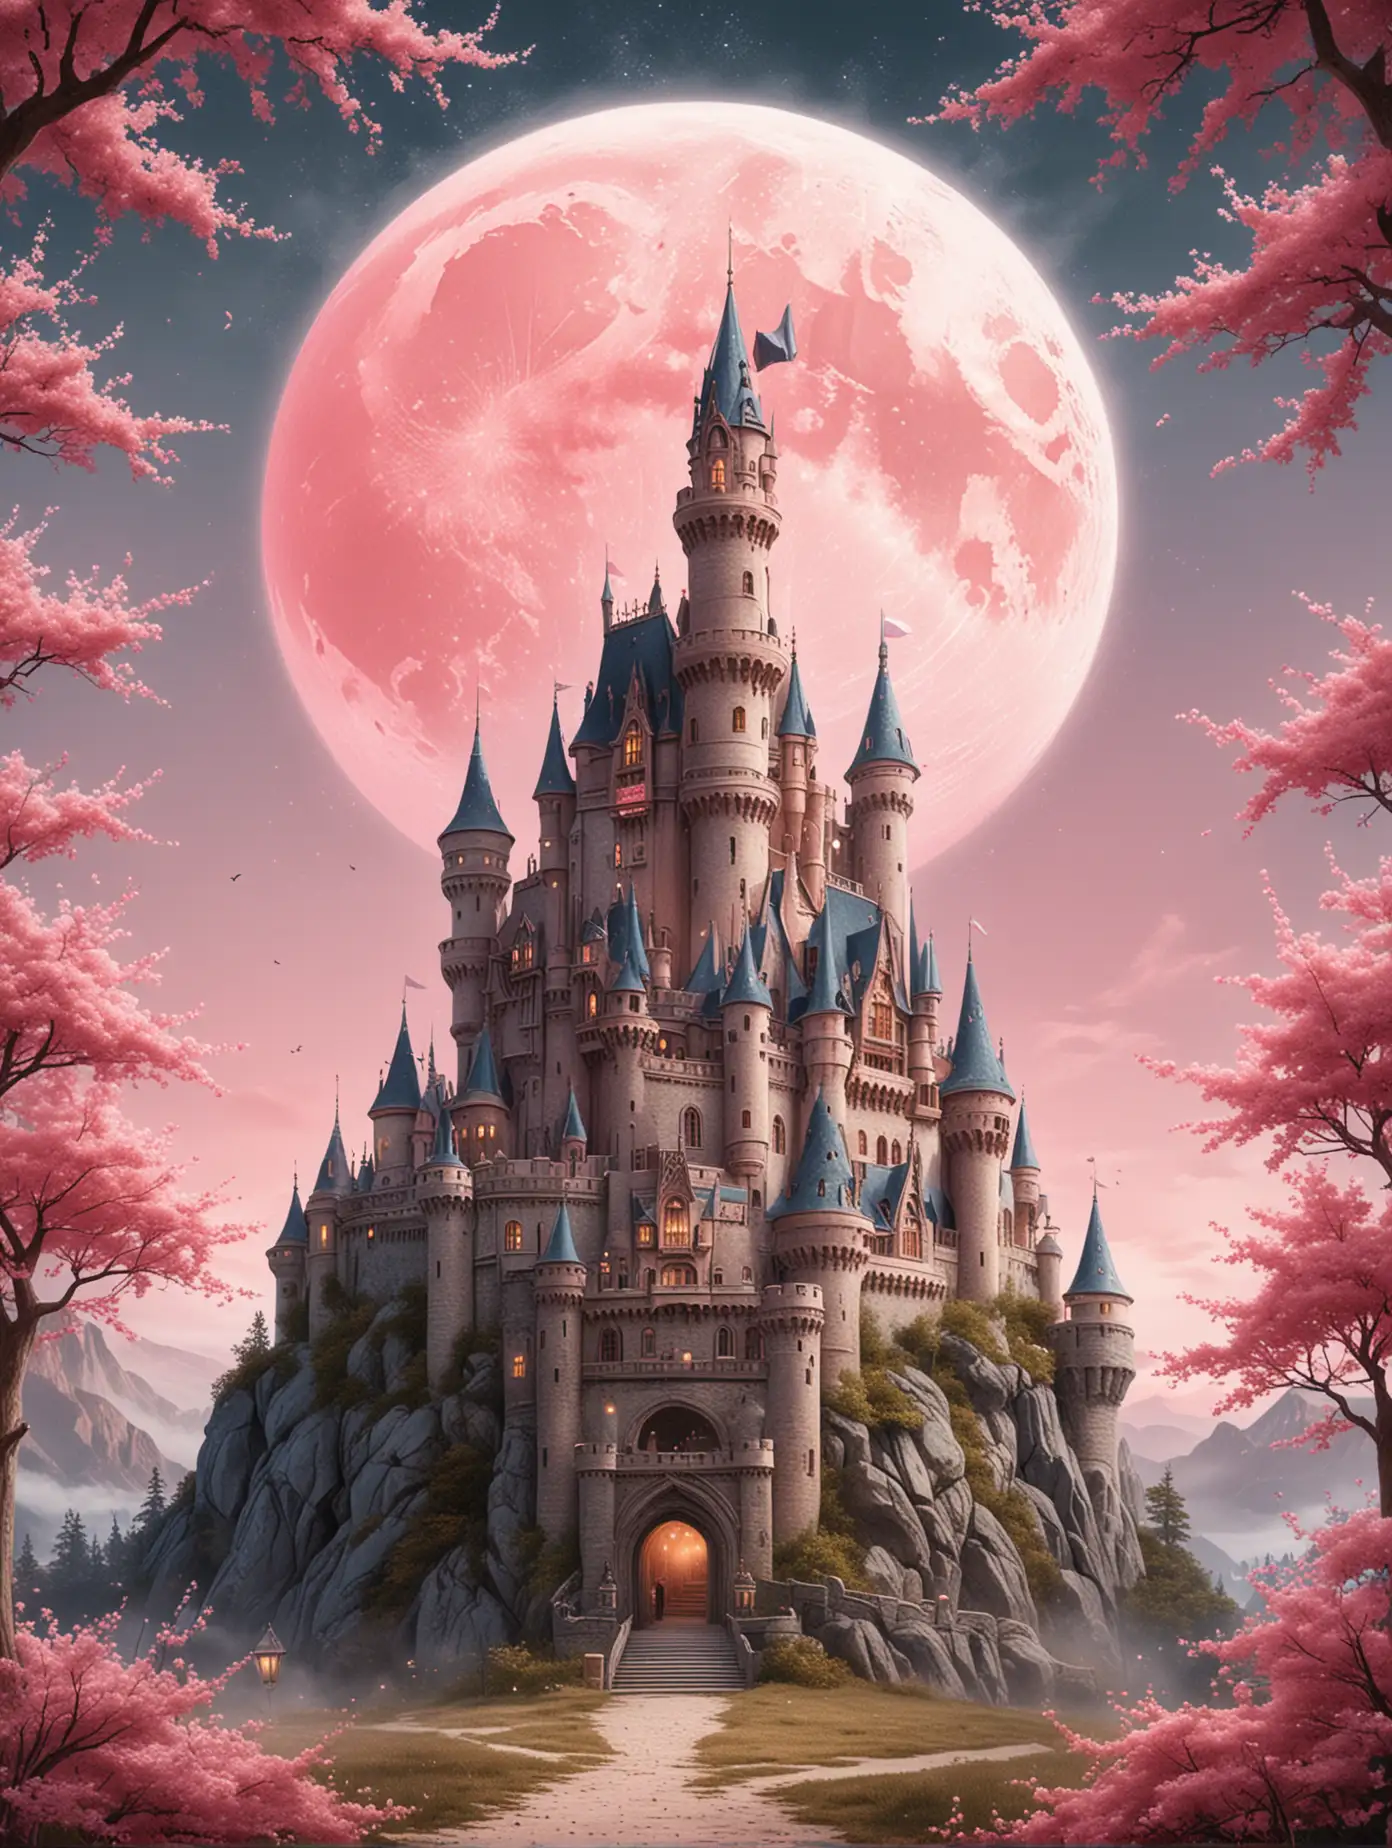 Enchanted Fairytale Castle with Pink Moon in Daylight